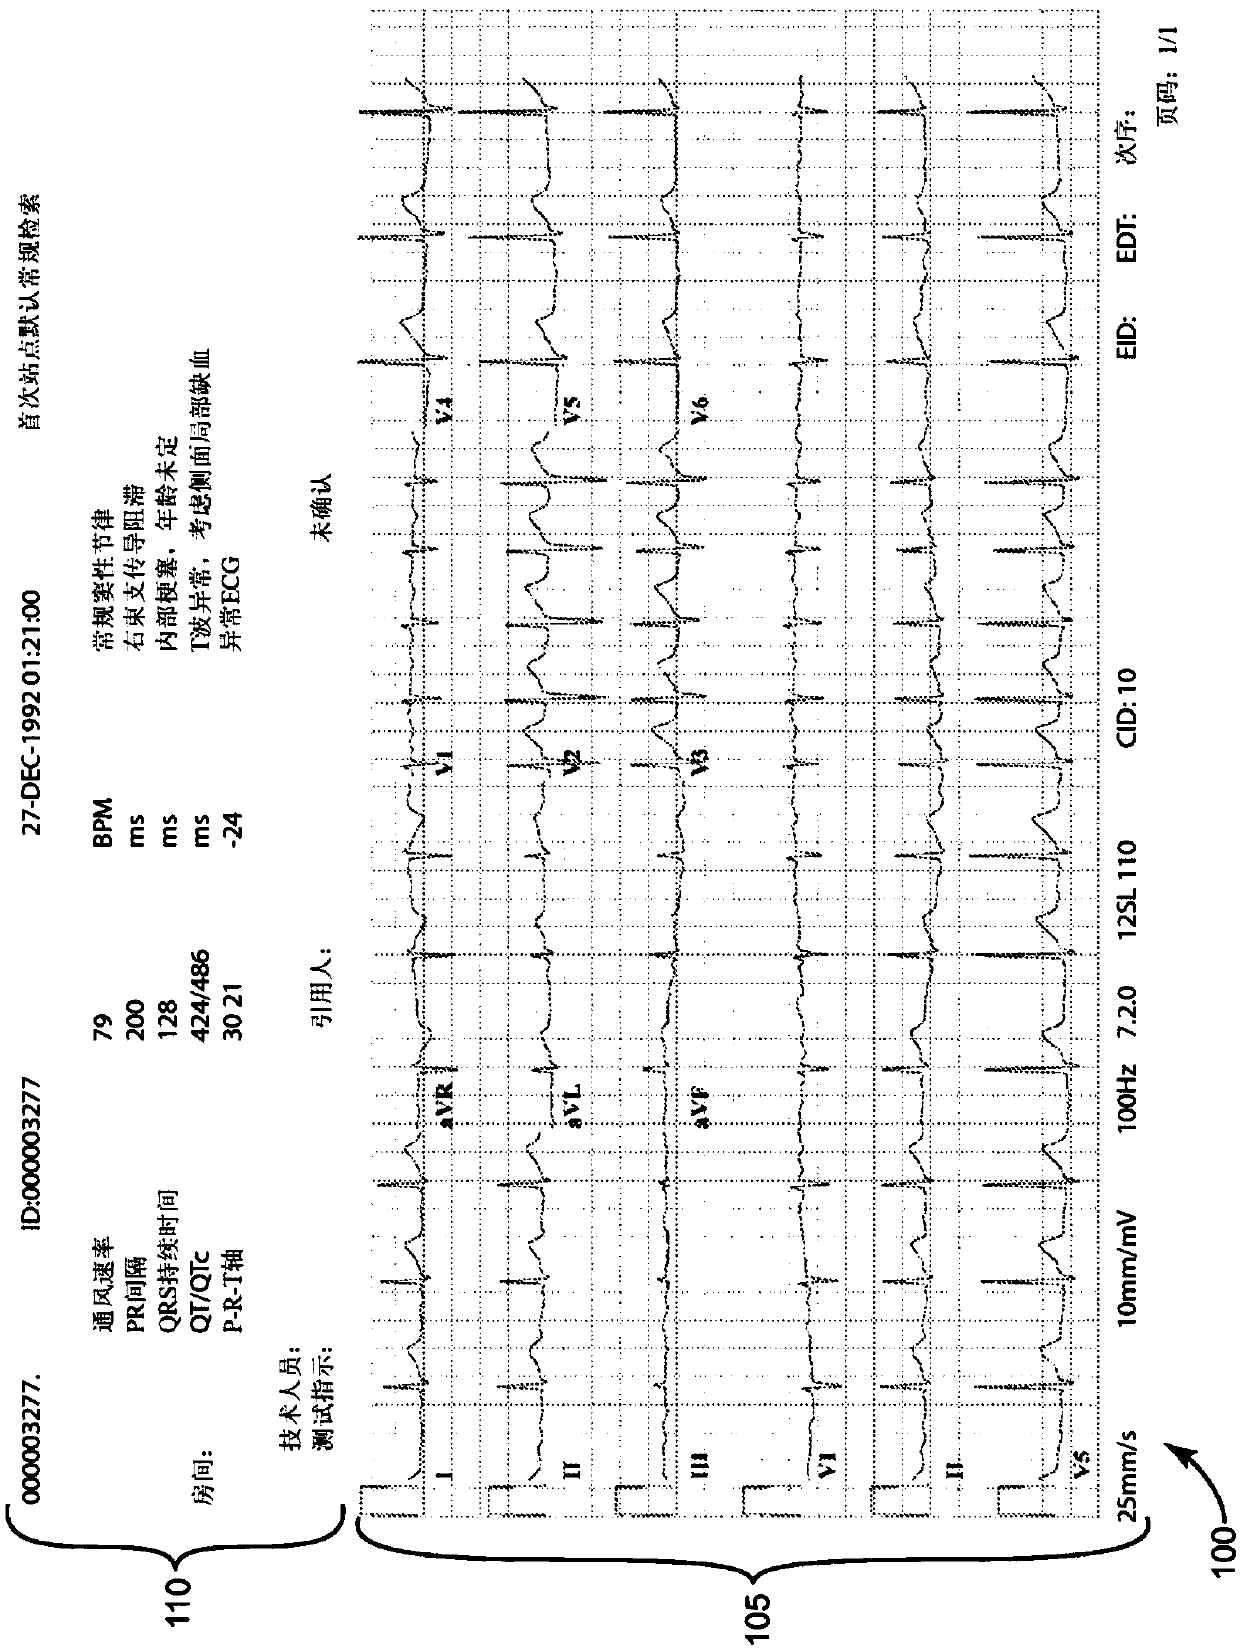 System for providing electrocardiogram (ECG) analytics for electronic medical records (EMR)